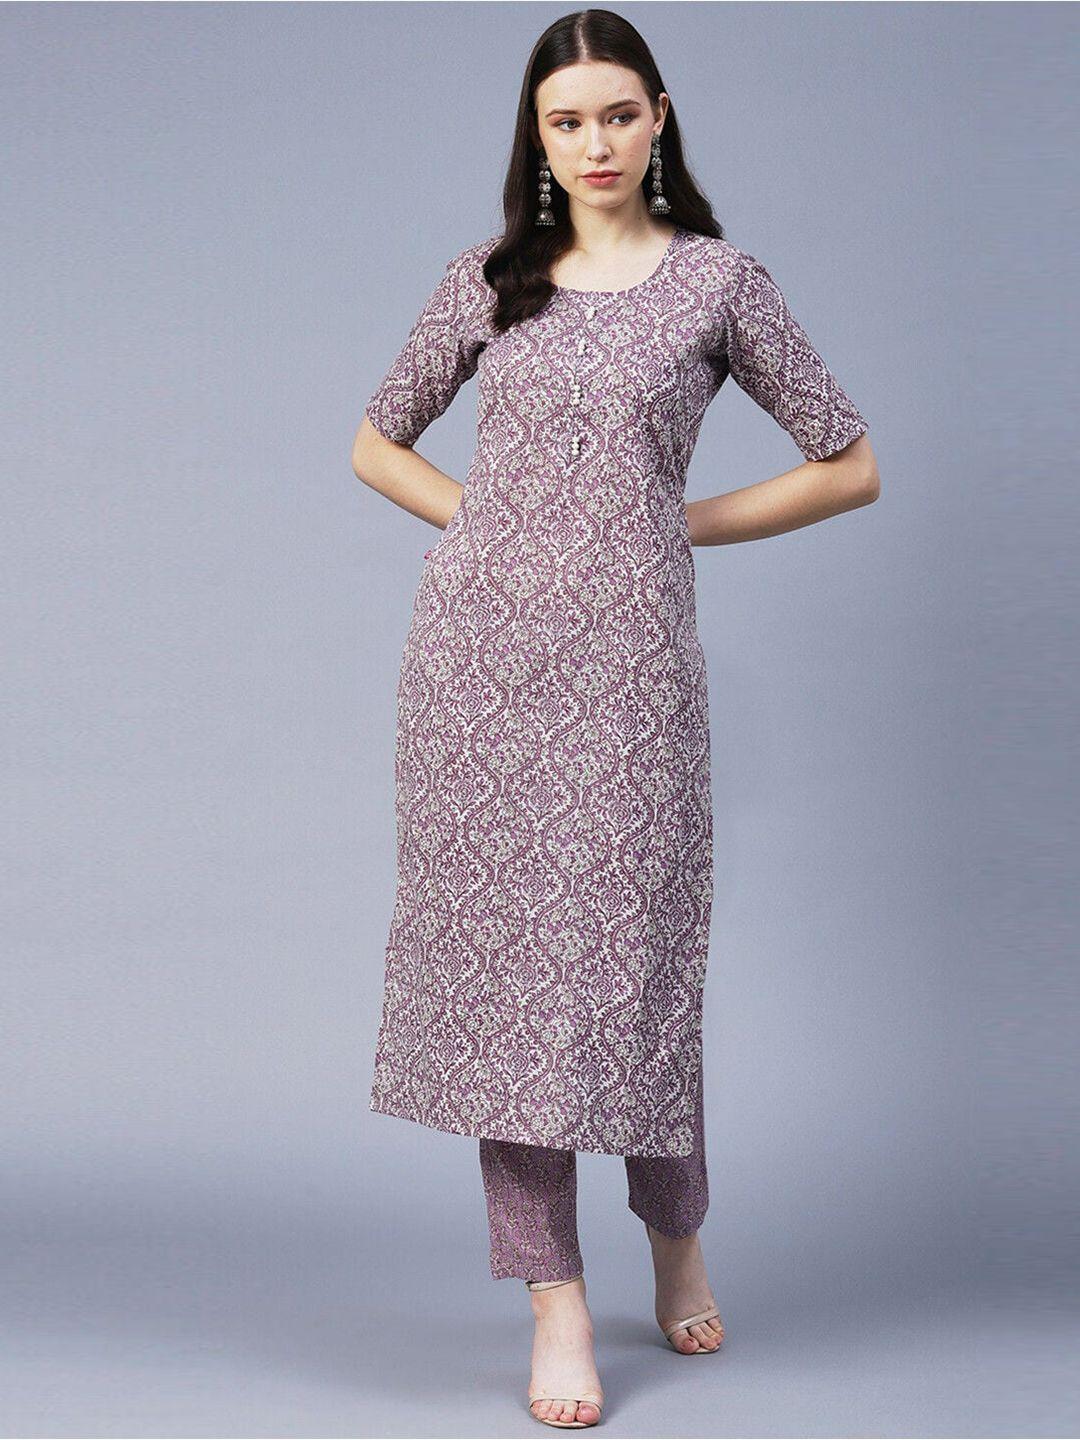 bollyclues floral printed pure cotton kurta with trousers